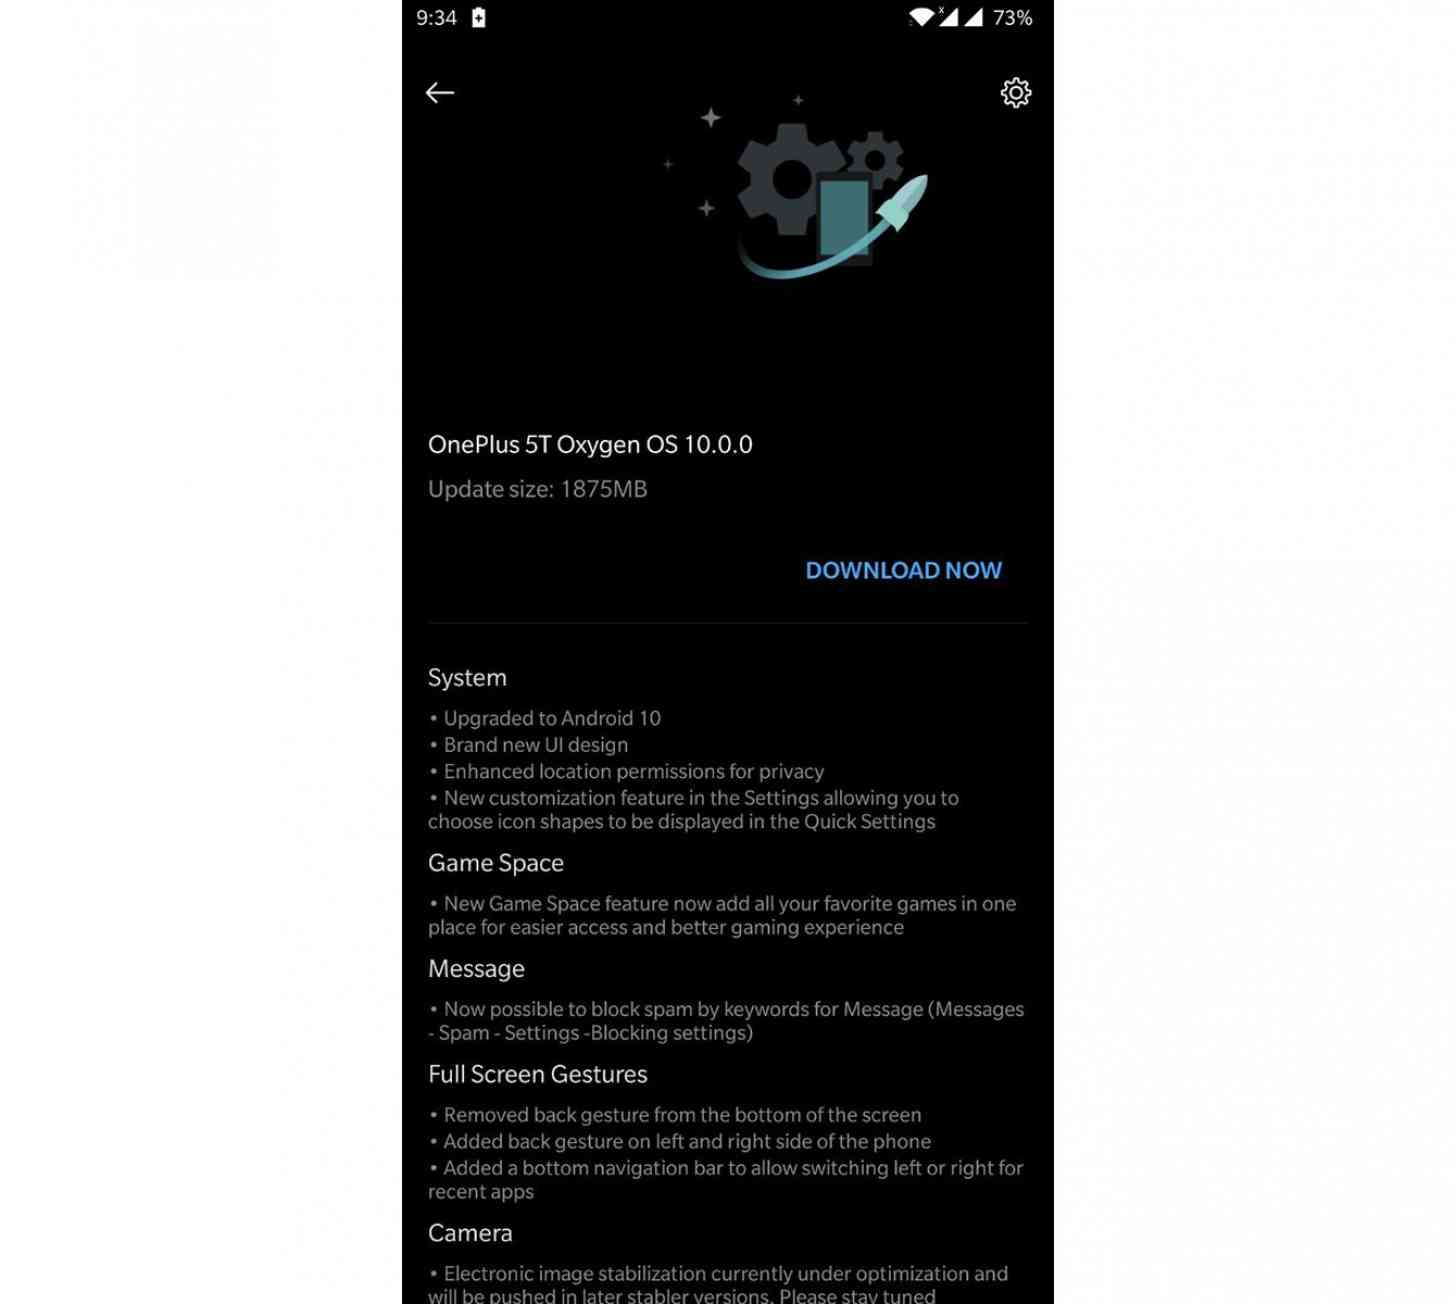 OnePlus 5T Android 10 update